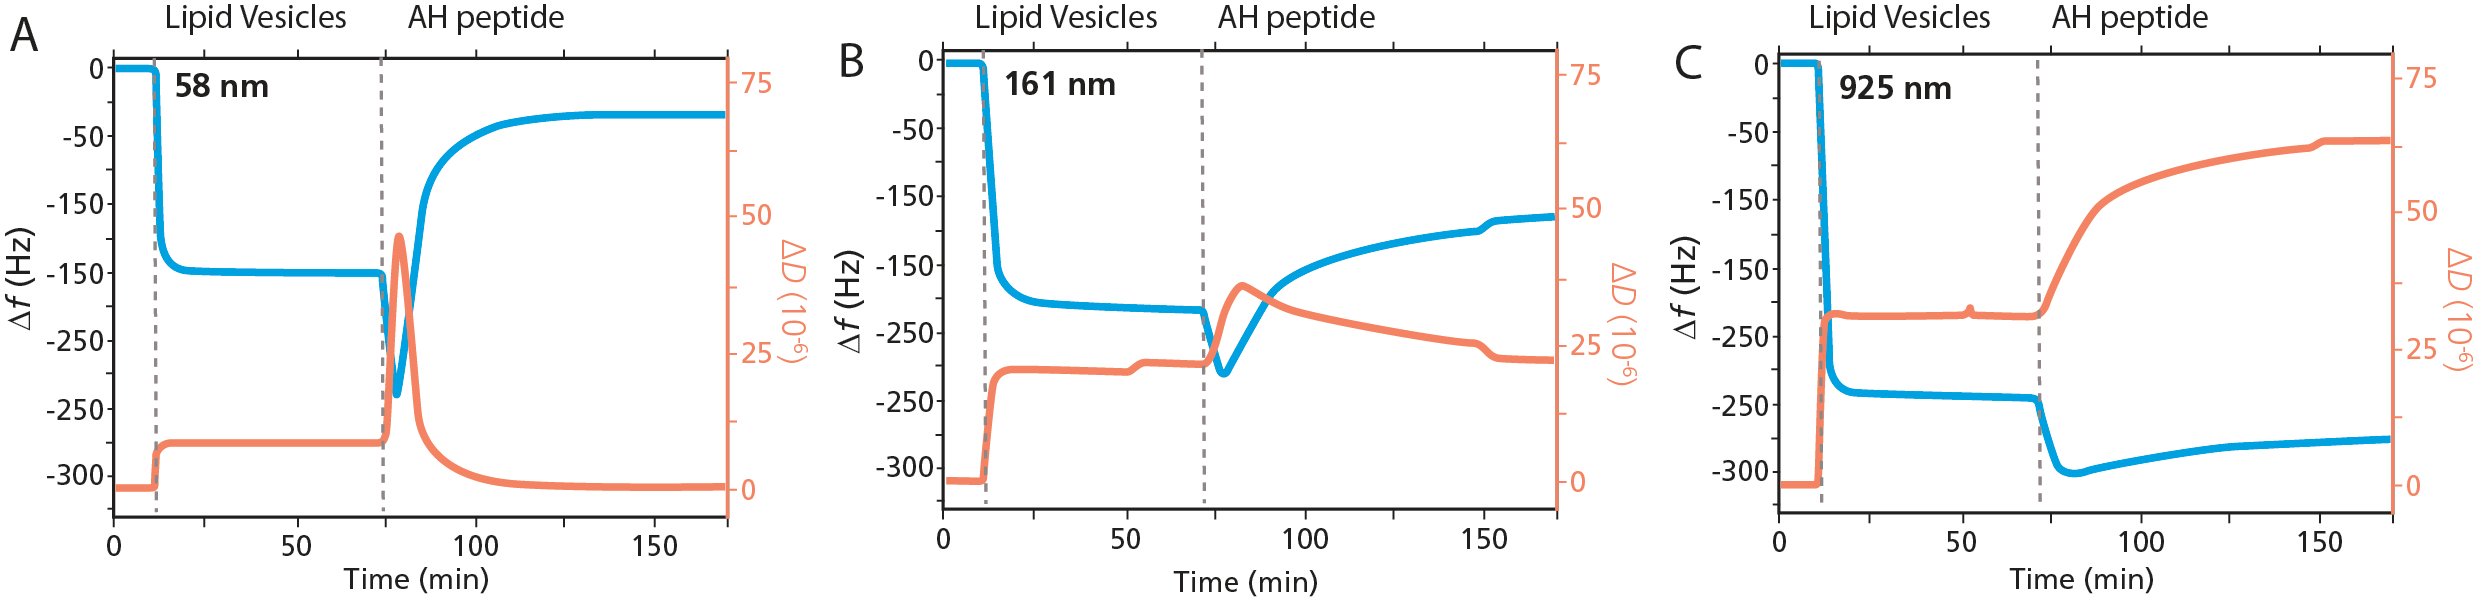 QCM-D analysis of AH peptide vesicle interaction